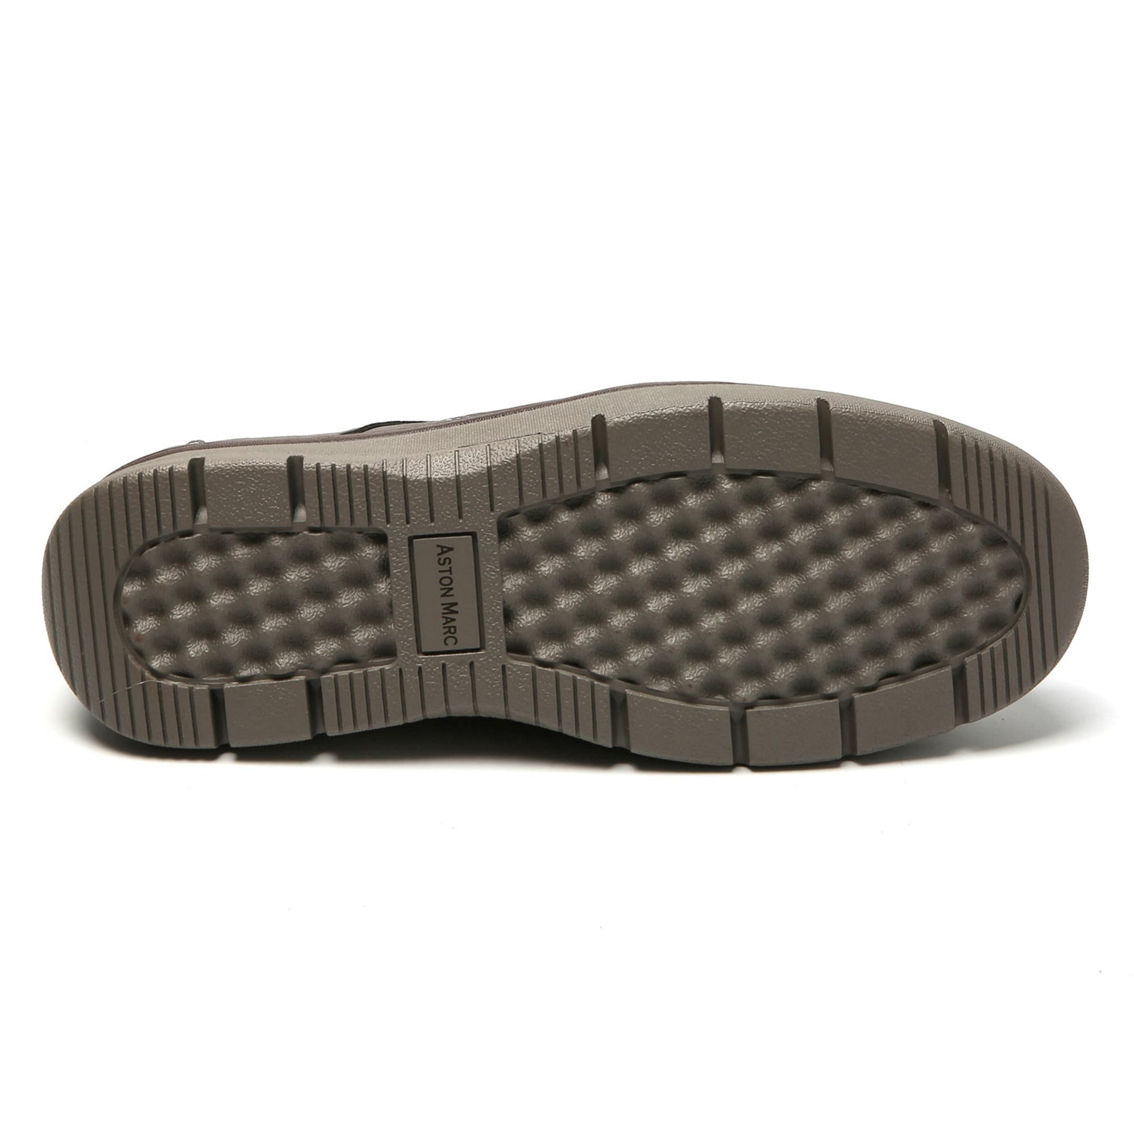 ASTON MARC MEN'S SLIP ON COMFORT CASUAL SHOES - Image 5 of 5